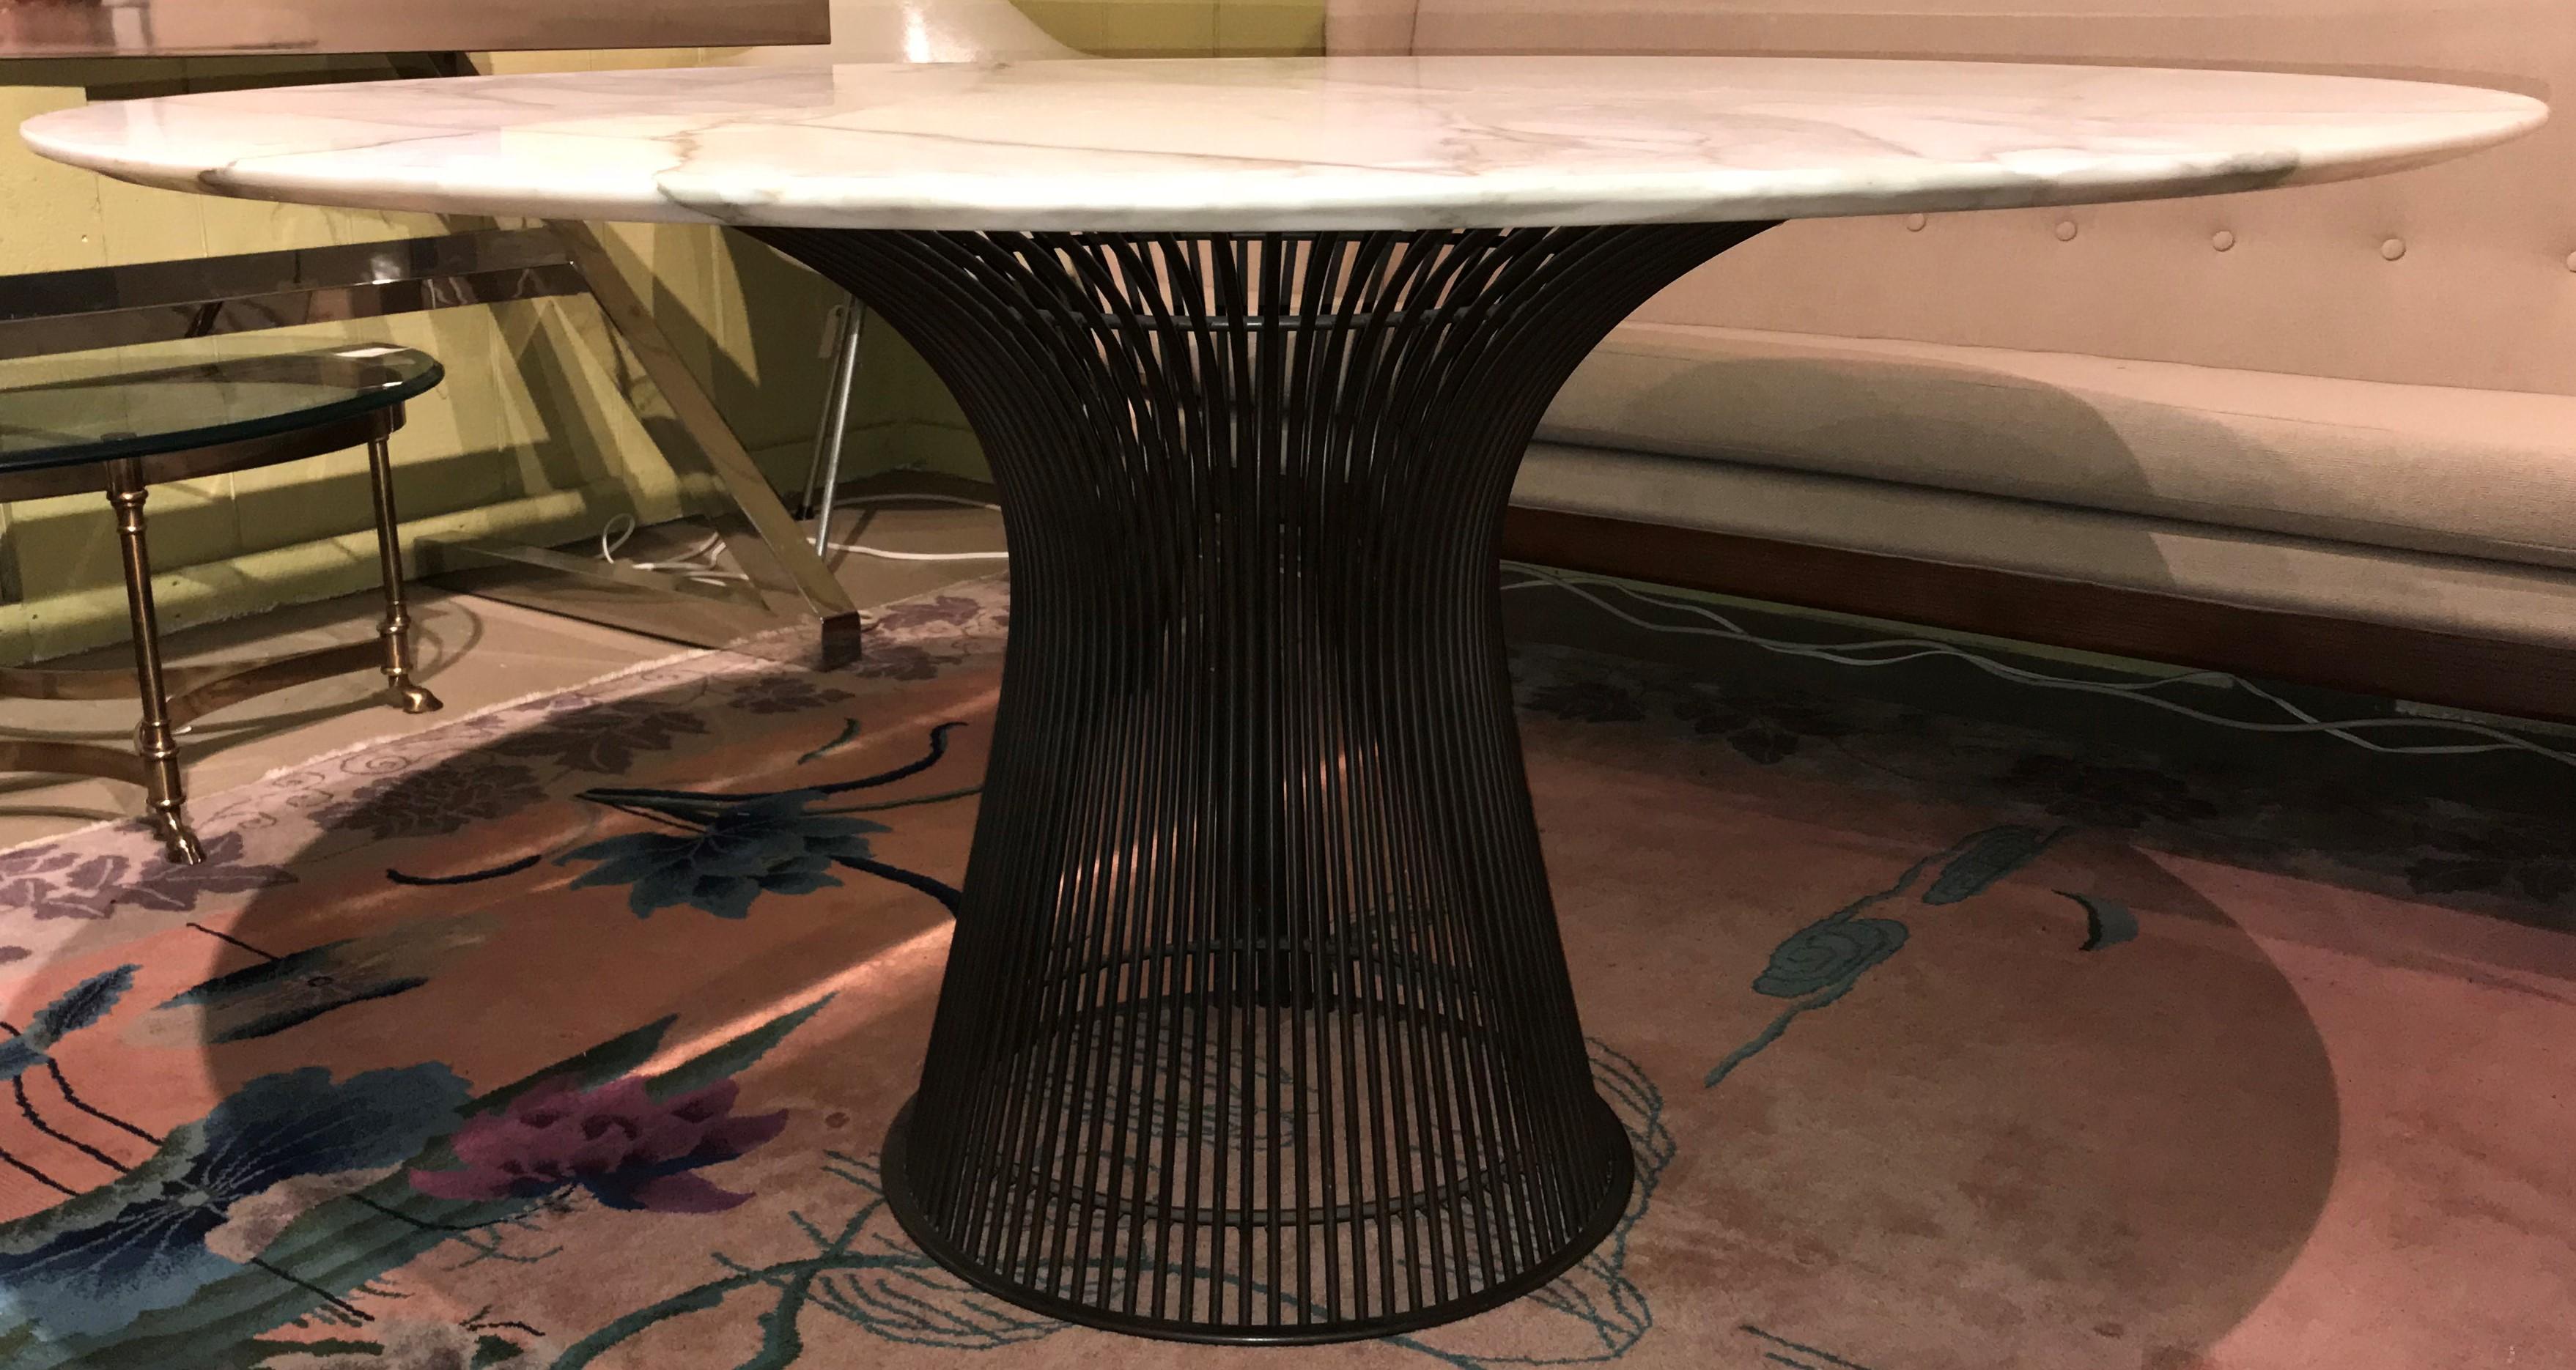 A sleek form round dining table designed by William Platner for Knoll International with a Carrara white marble top surmounting a twisting steel rod or wire frame with a metallic bronze finish, circa 1960s-1970s, in very good overall condition, with